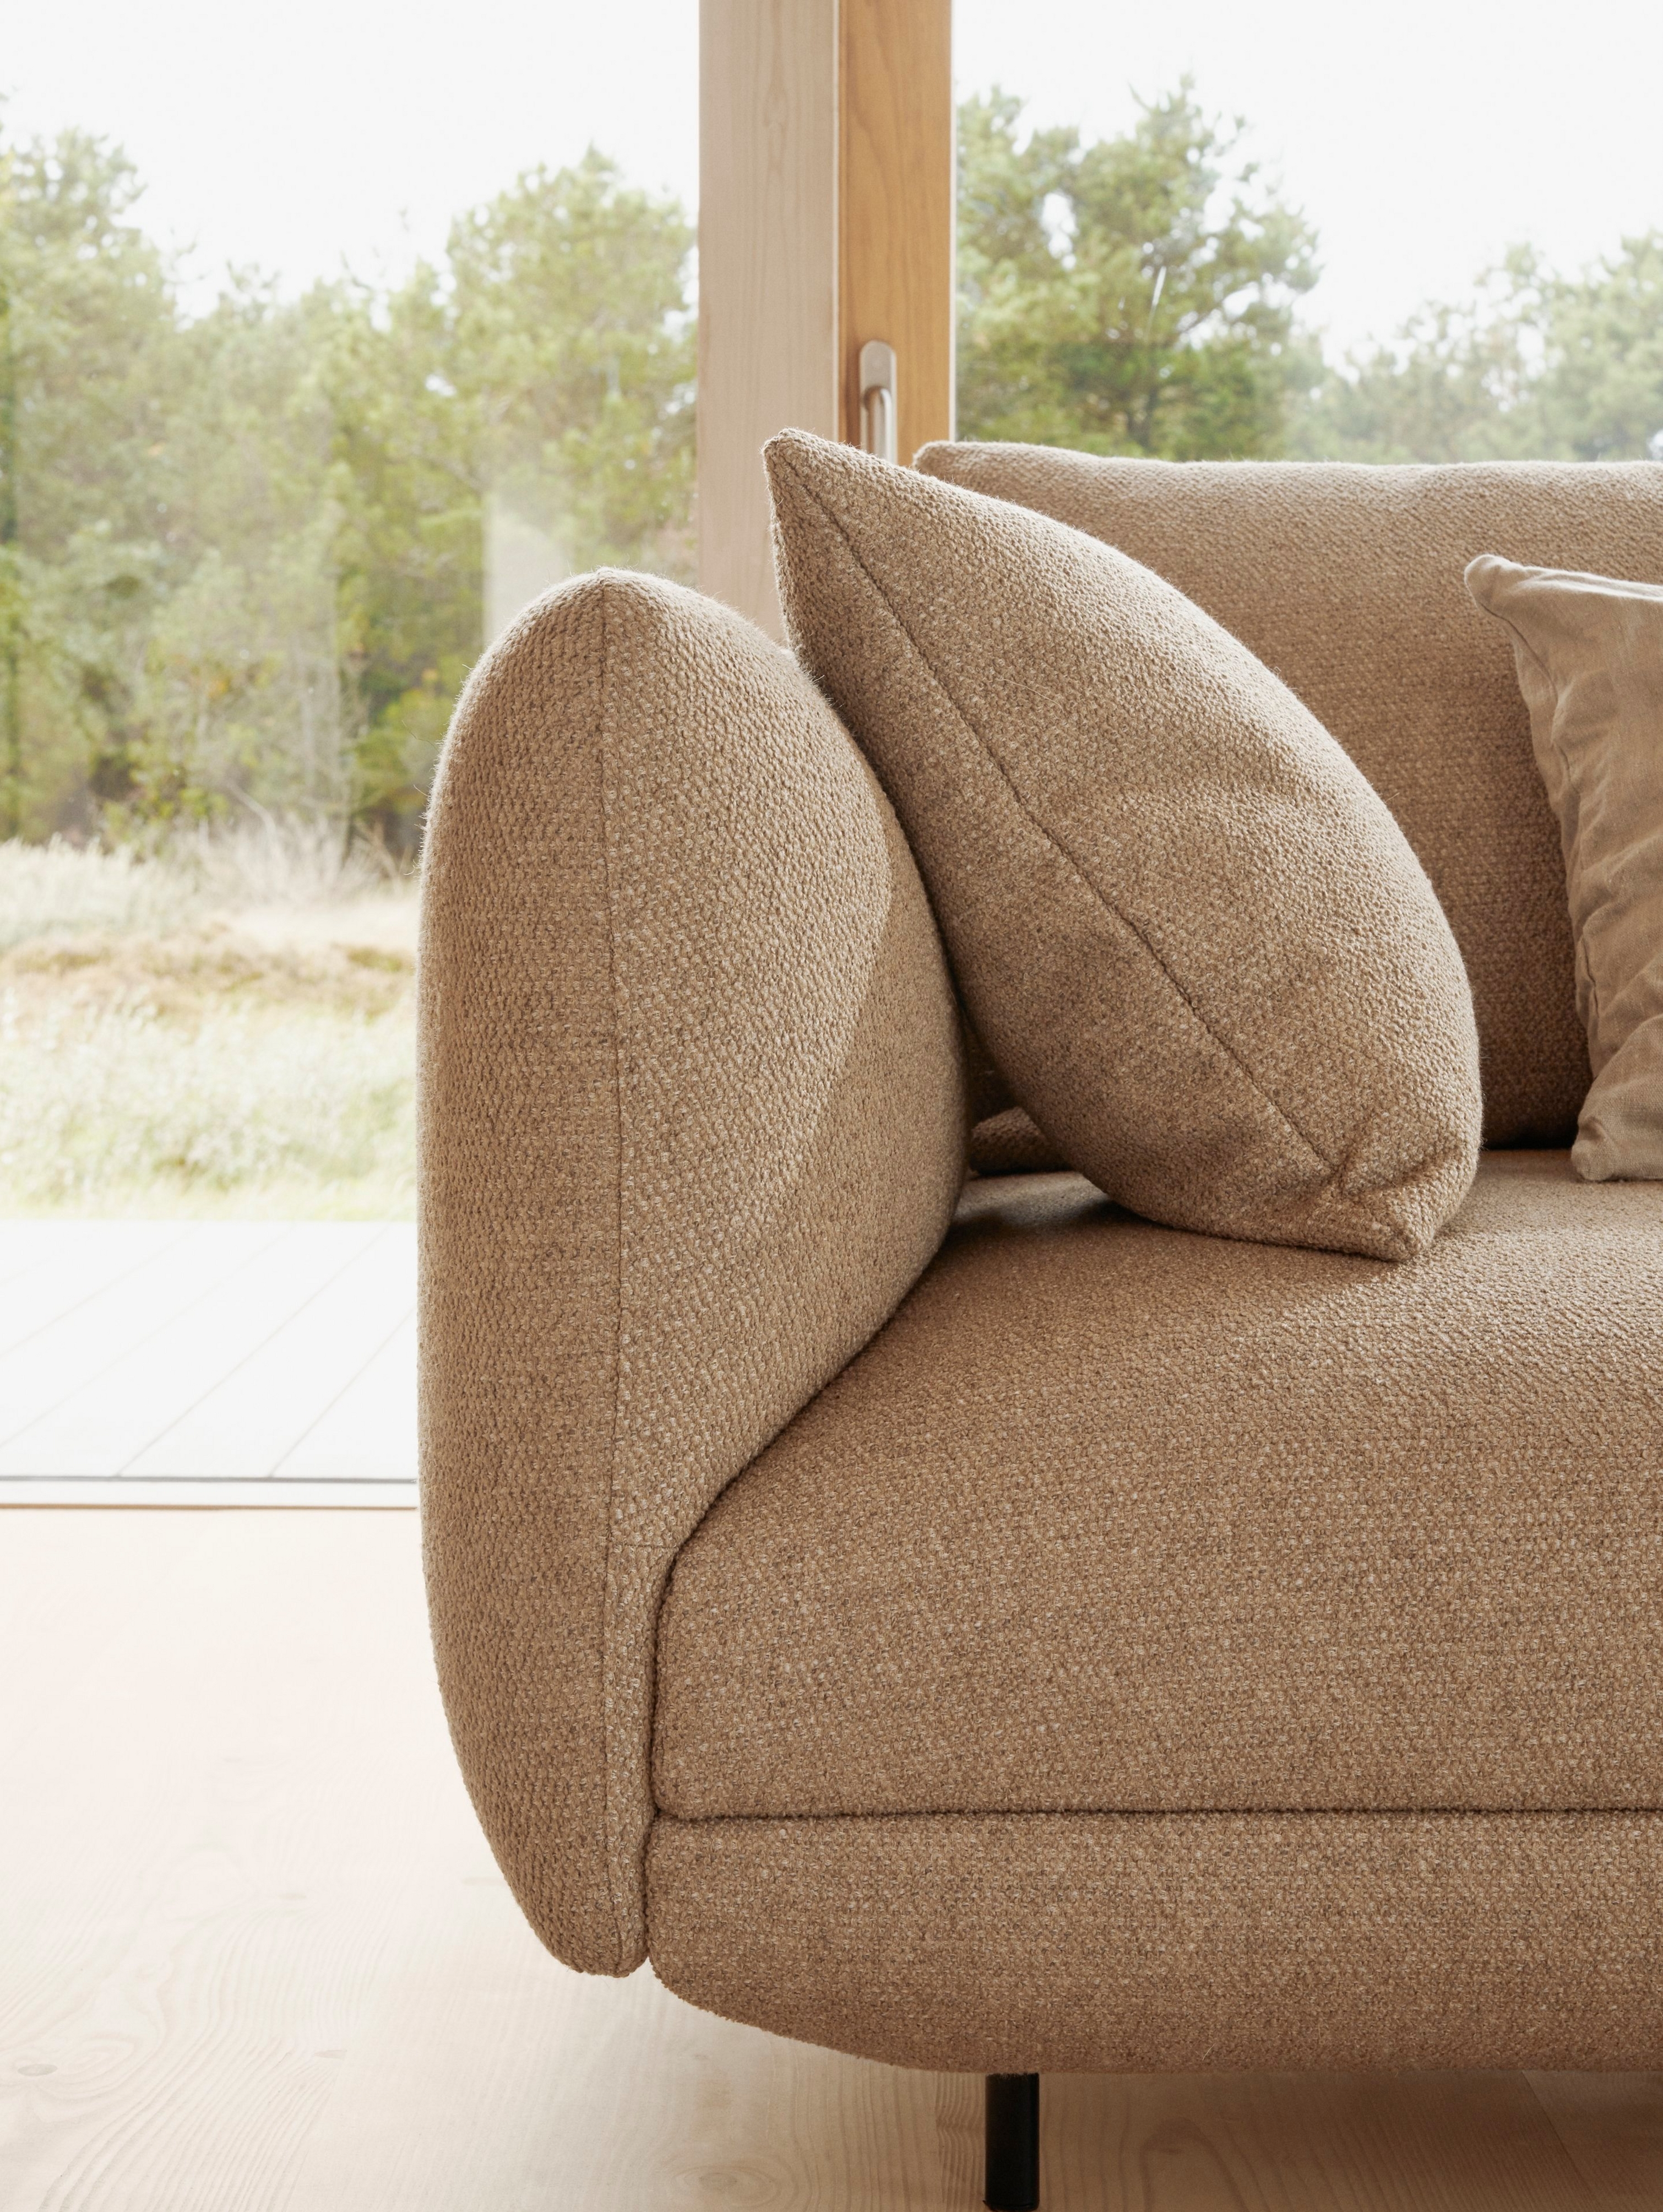 A close-up view of a Salamanca sofa armrest in a sunlit living room